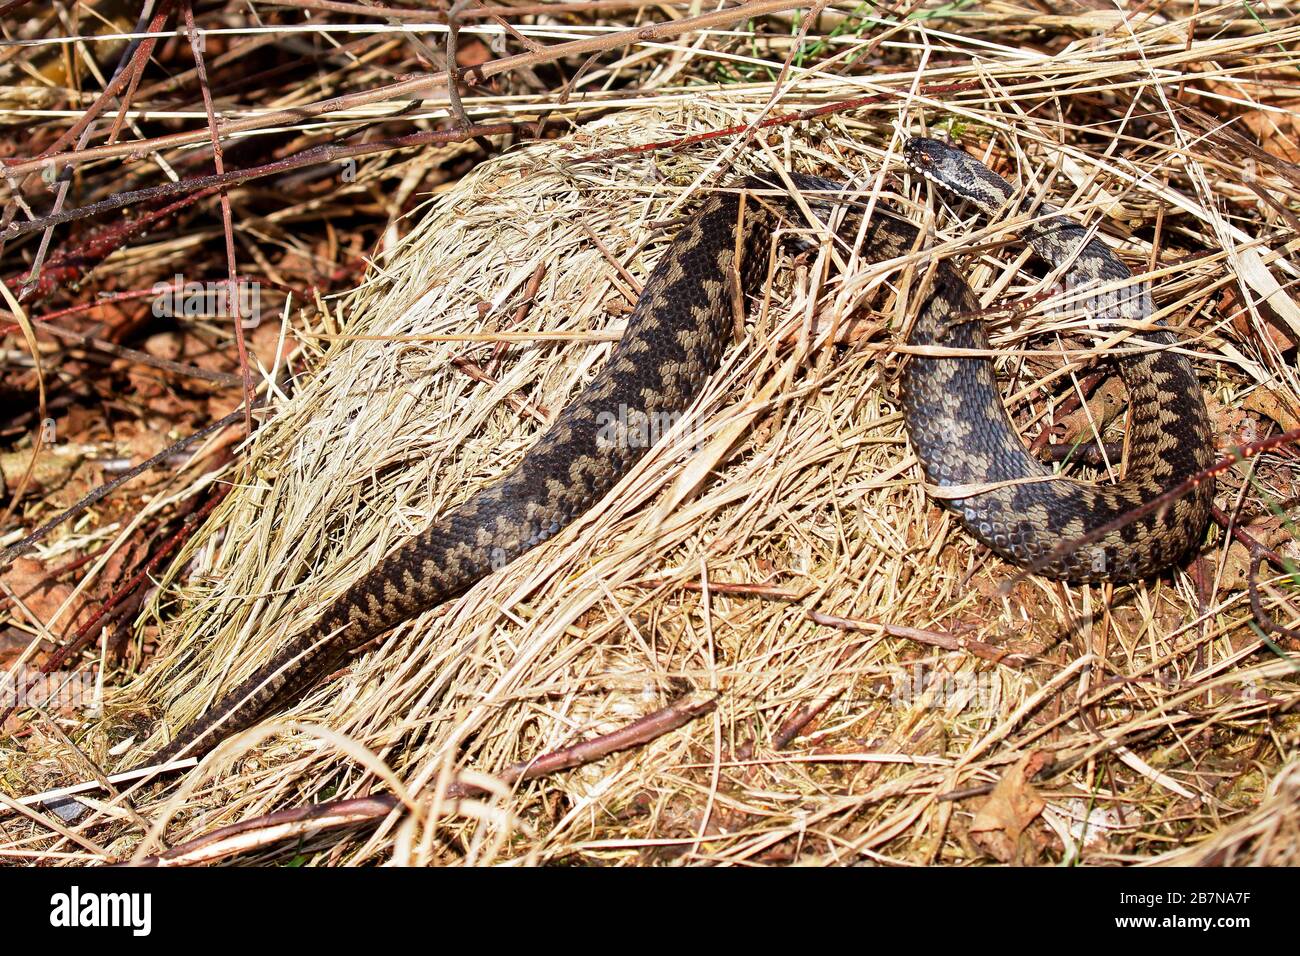 Common European viper (Vipera berus) sunning herself in her hiding place, Schleswig-Holstein, Germany Stock Photo